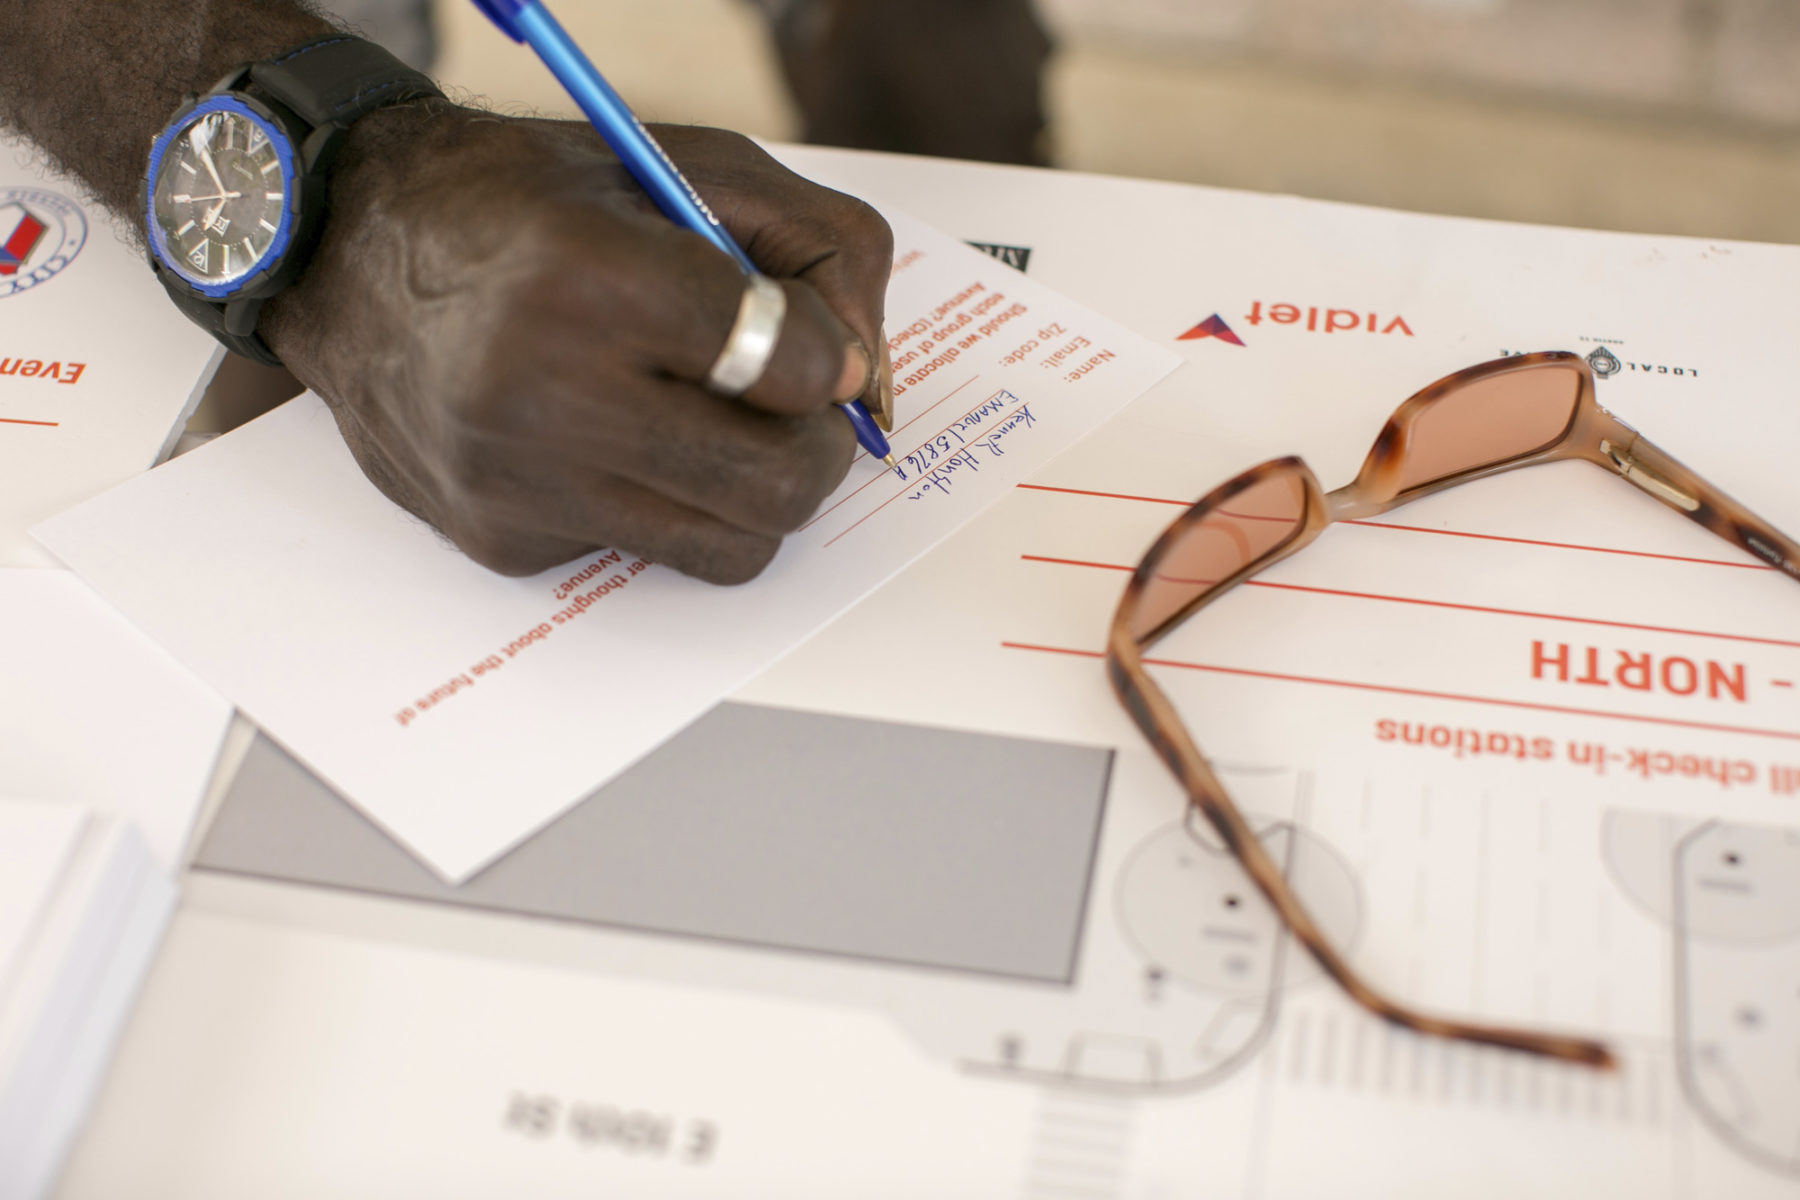 A detail photo of a resident's hand filling out a comment card at a public engagement session. Sunglasses sit on top of a stack of cards.